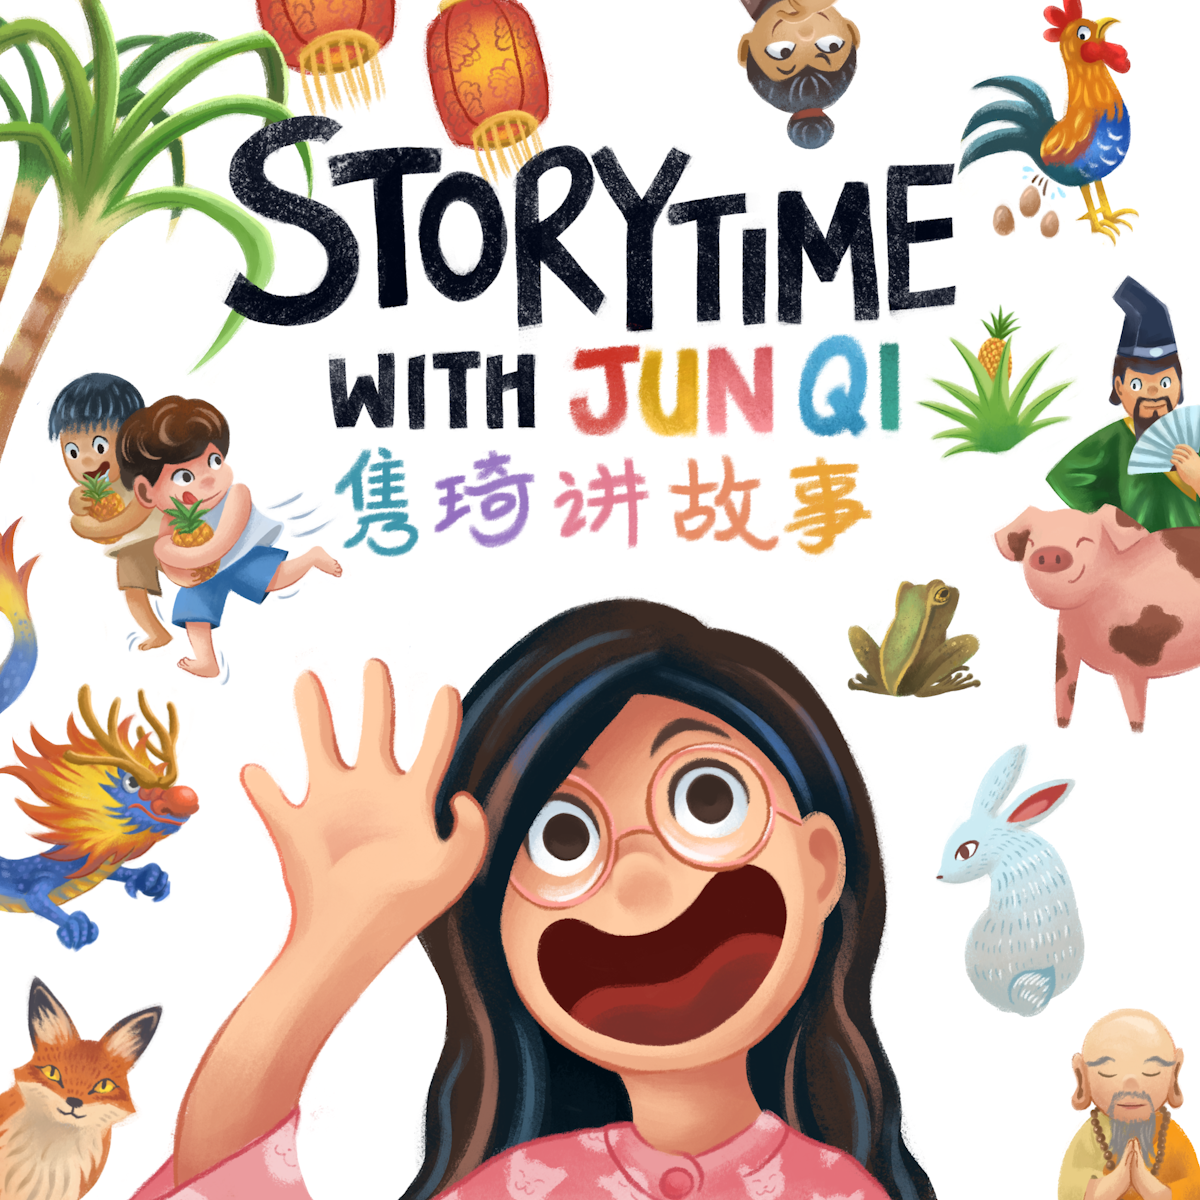 Illustration with a caricature of Jun Qi telling a story and characters from the story filling a speech bubble over her head